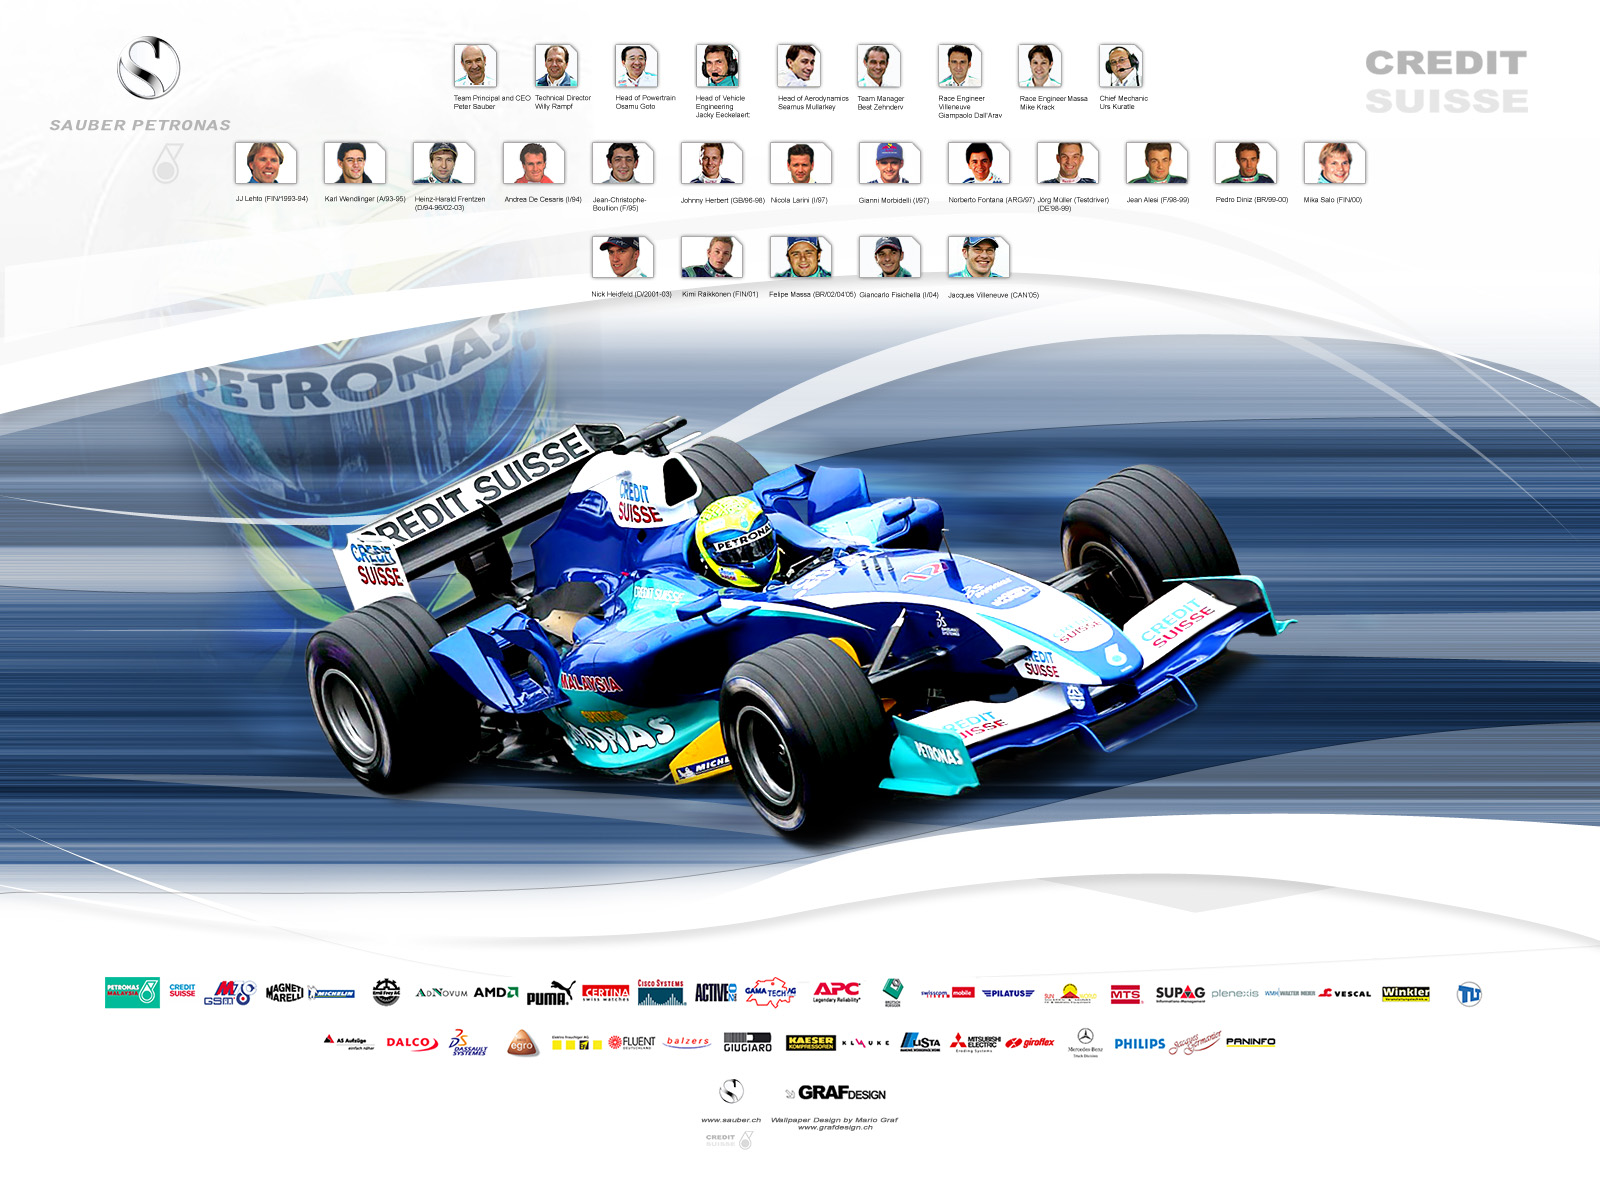 f1 wallpaper 1 you are viewing the f1 wallpaper named f1 1 it has been